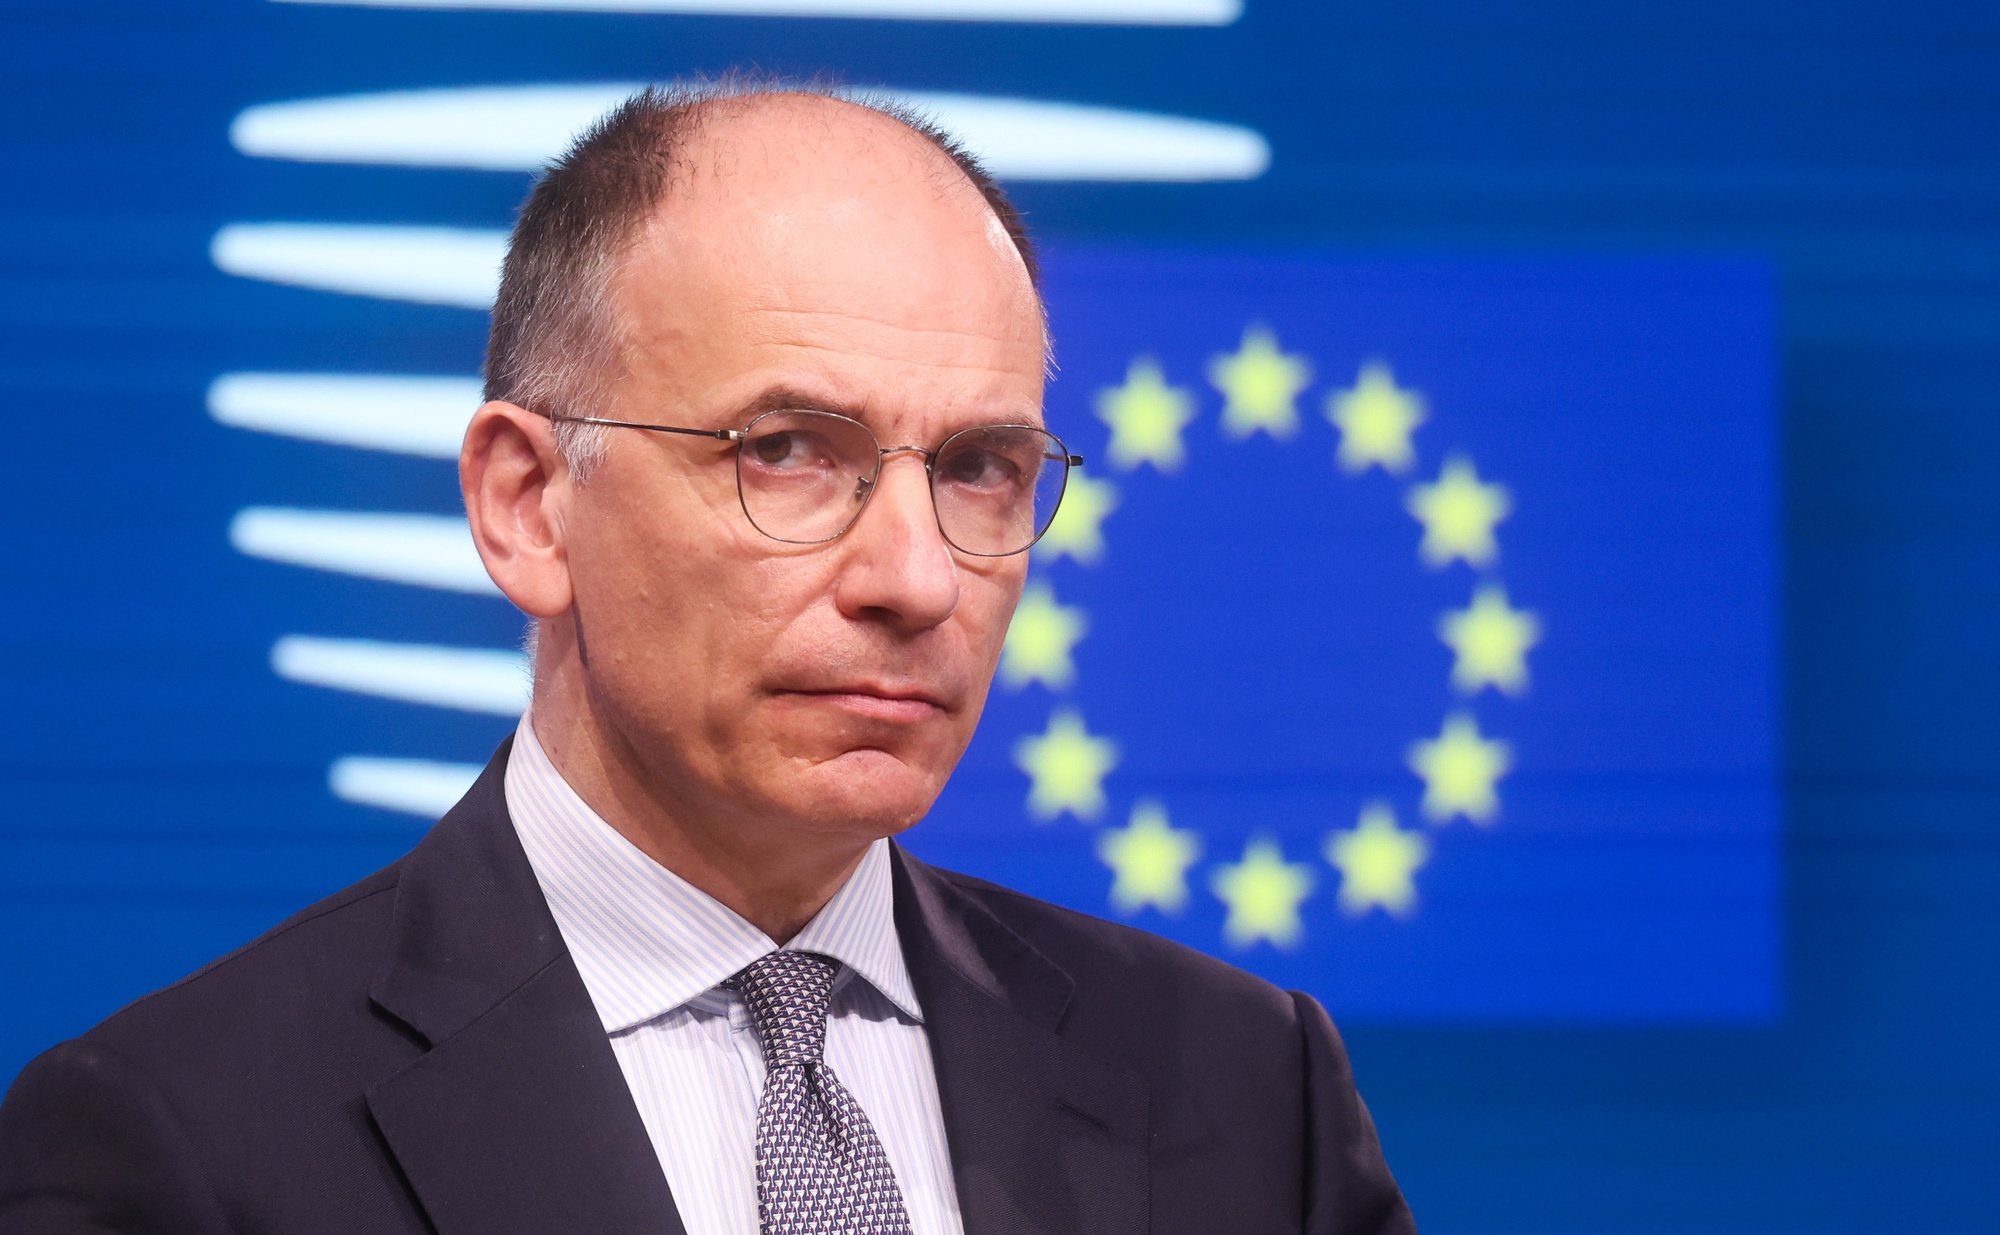 epa11284014 Enrico Letta, former President of the Italian Council and President of the Jacques Delors Institute and author of the High-Level Report on the future of the Single Market,  gives a press conference before the Special European council in Brussels, Belgium, 17 April 2024. Over a two-day summit, EU leaders will discuss economy and competitiveness issues, Ukraine and the Middle East.  EPA/OLIVIER HOSLET